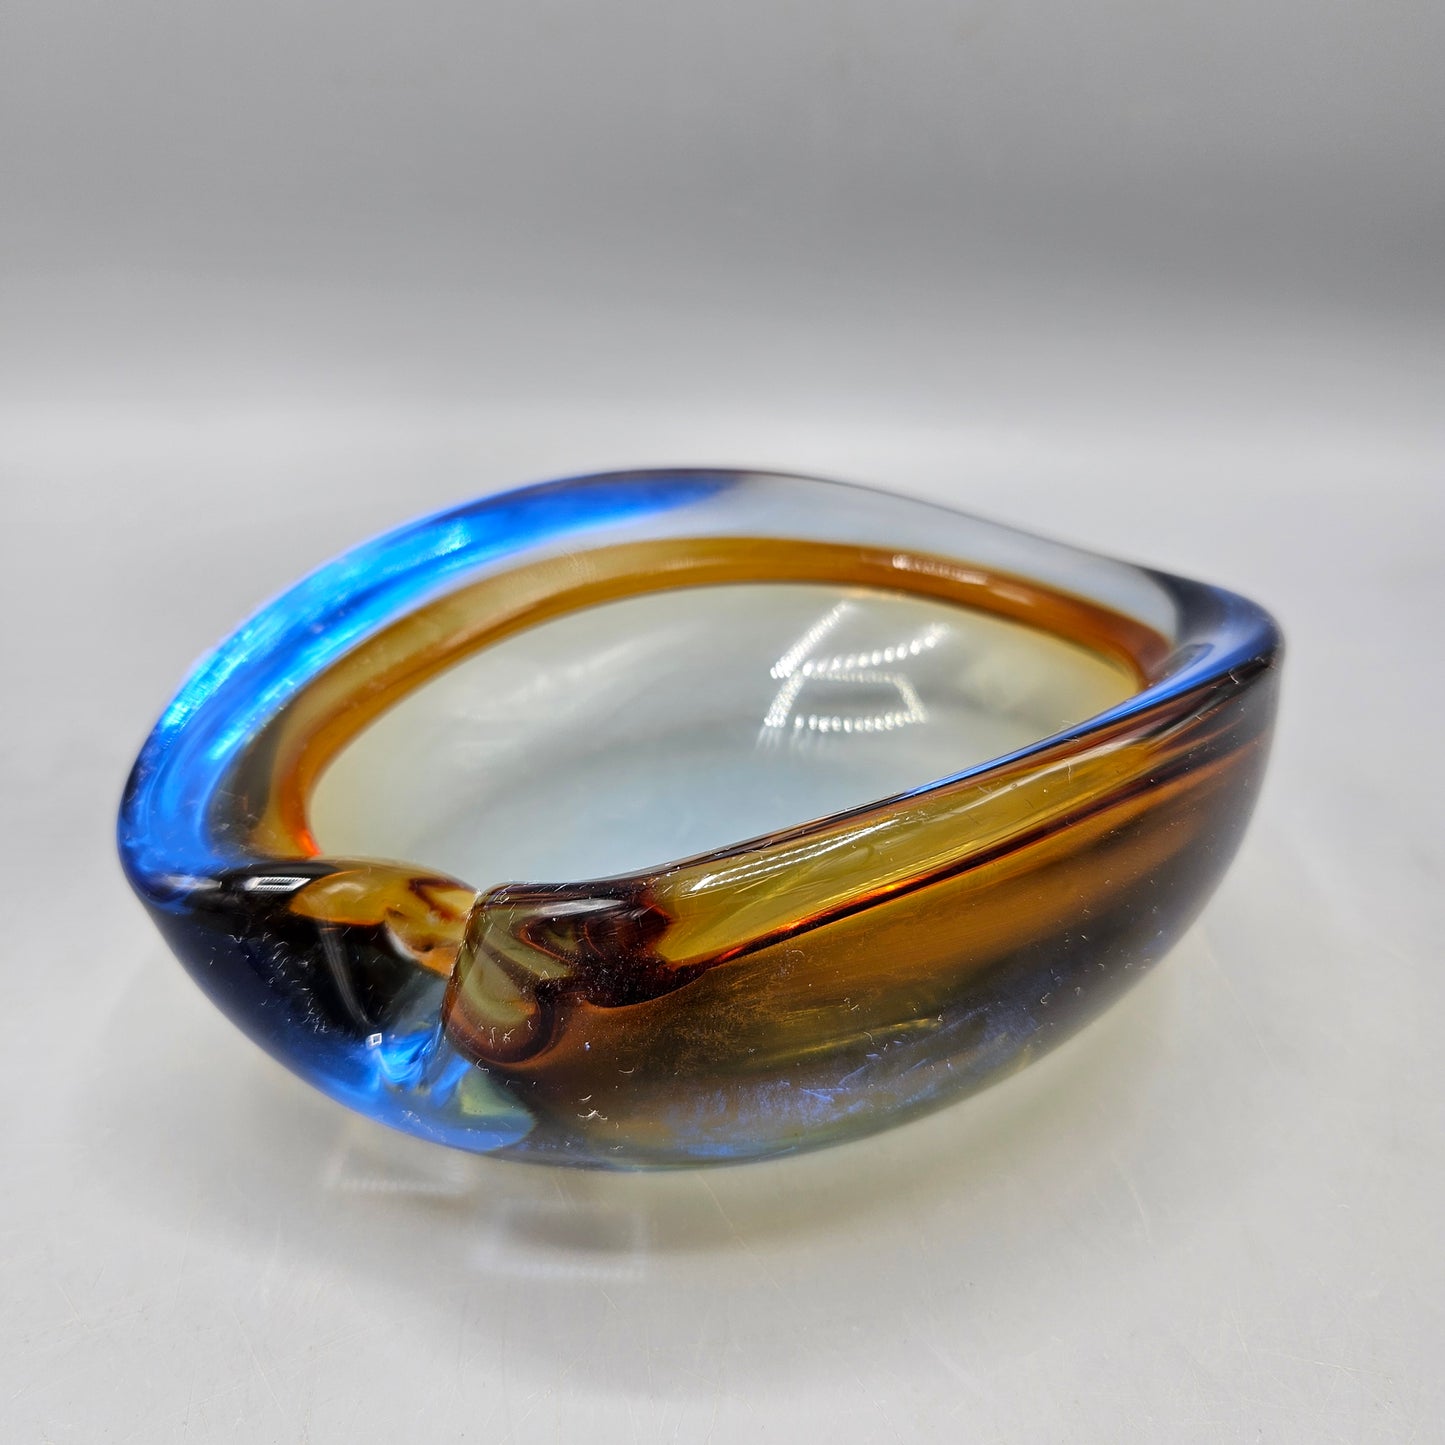 Vintage Murano Sommerso Blue and Yellow Ashtray